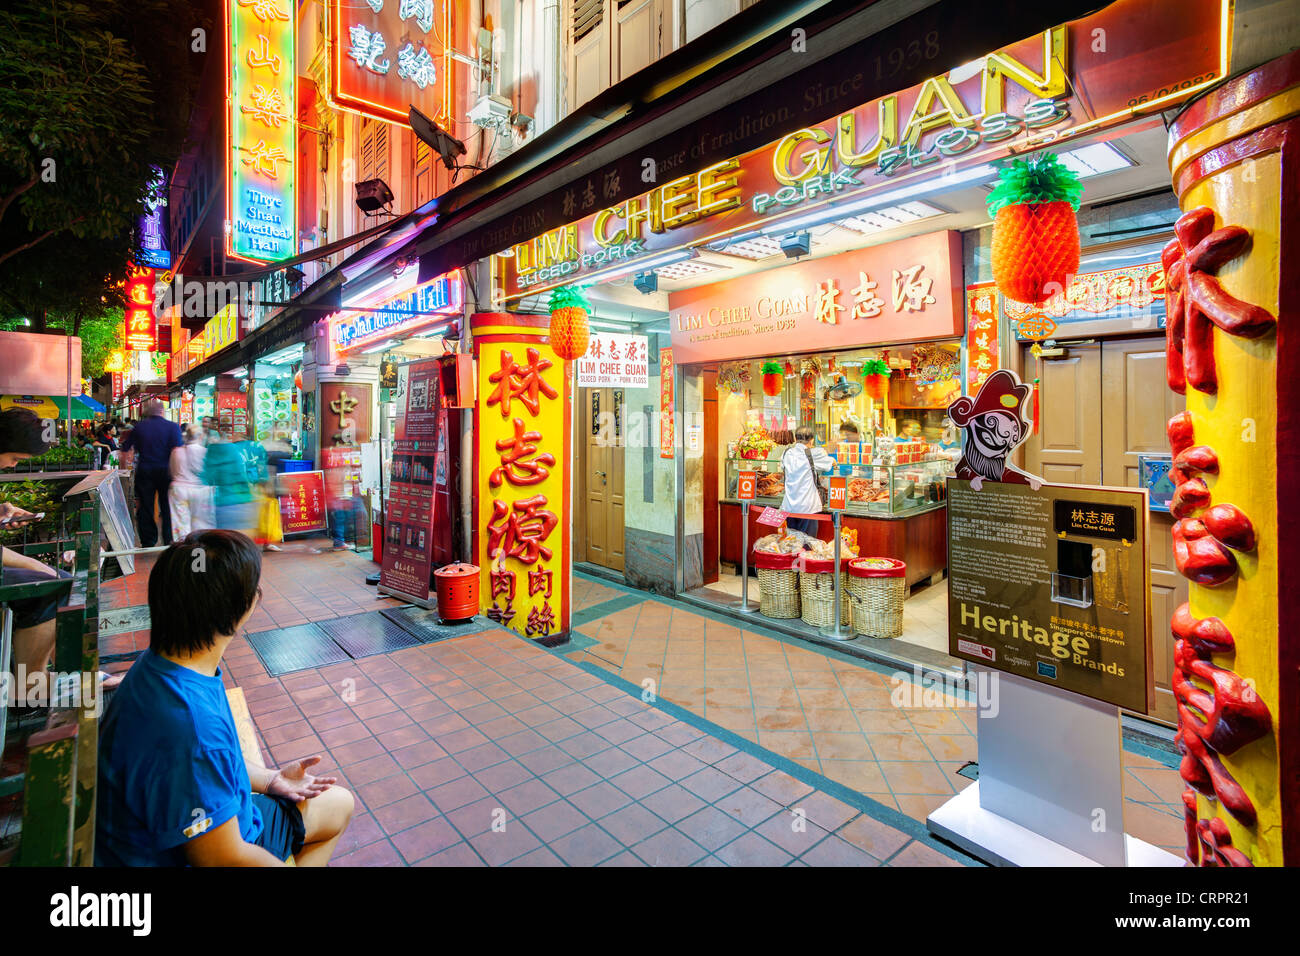 South East Asia, Singapur, New Bridge Road, Chinatown, traditionelle chinesische shopfronts Stockfoto